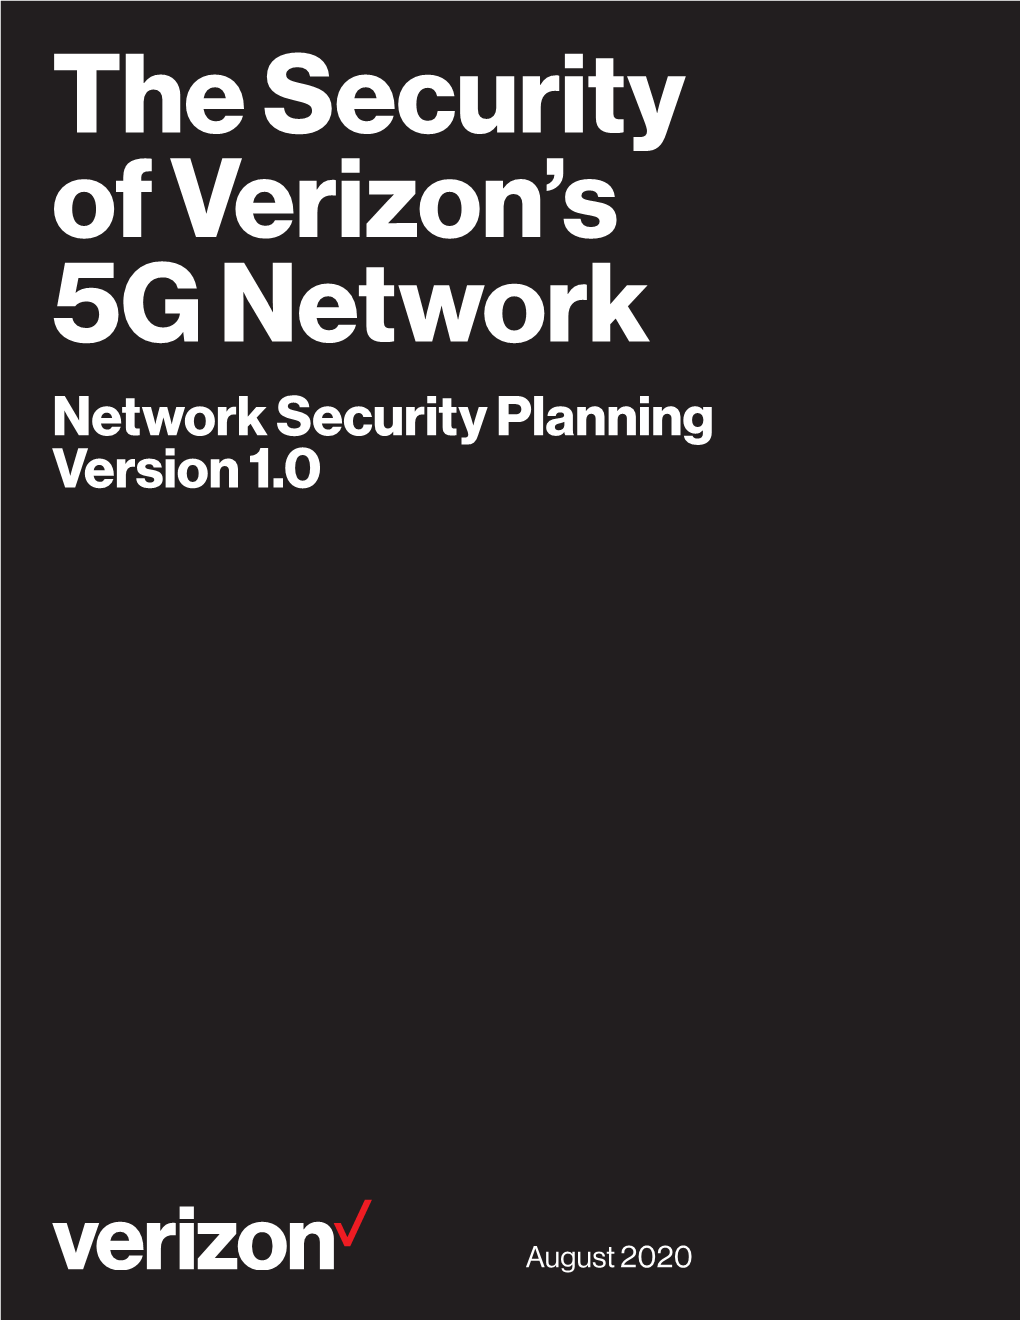 The Security of Verizon's 5G Network